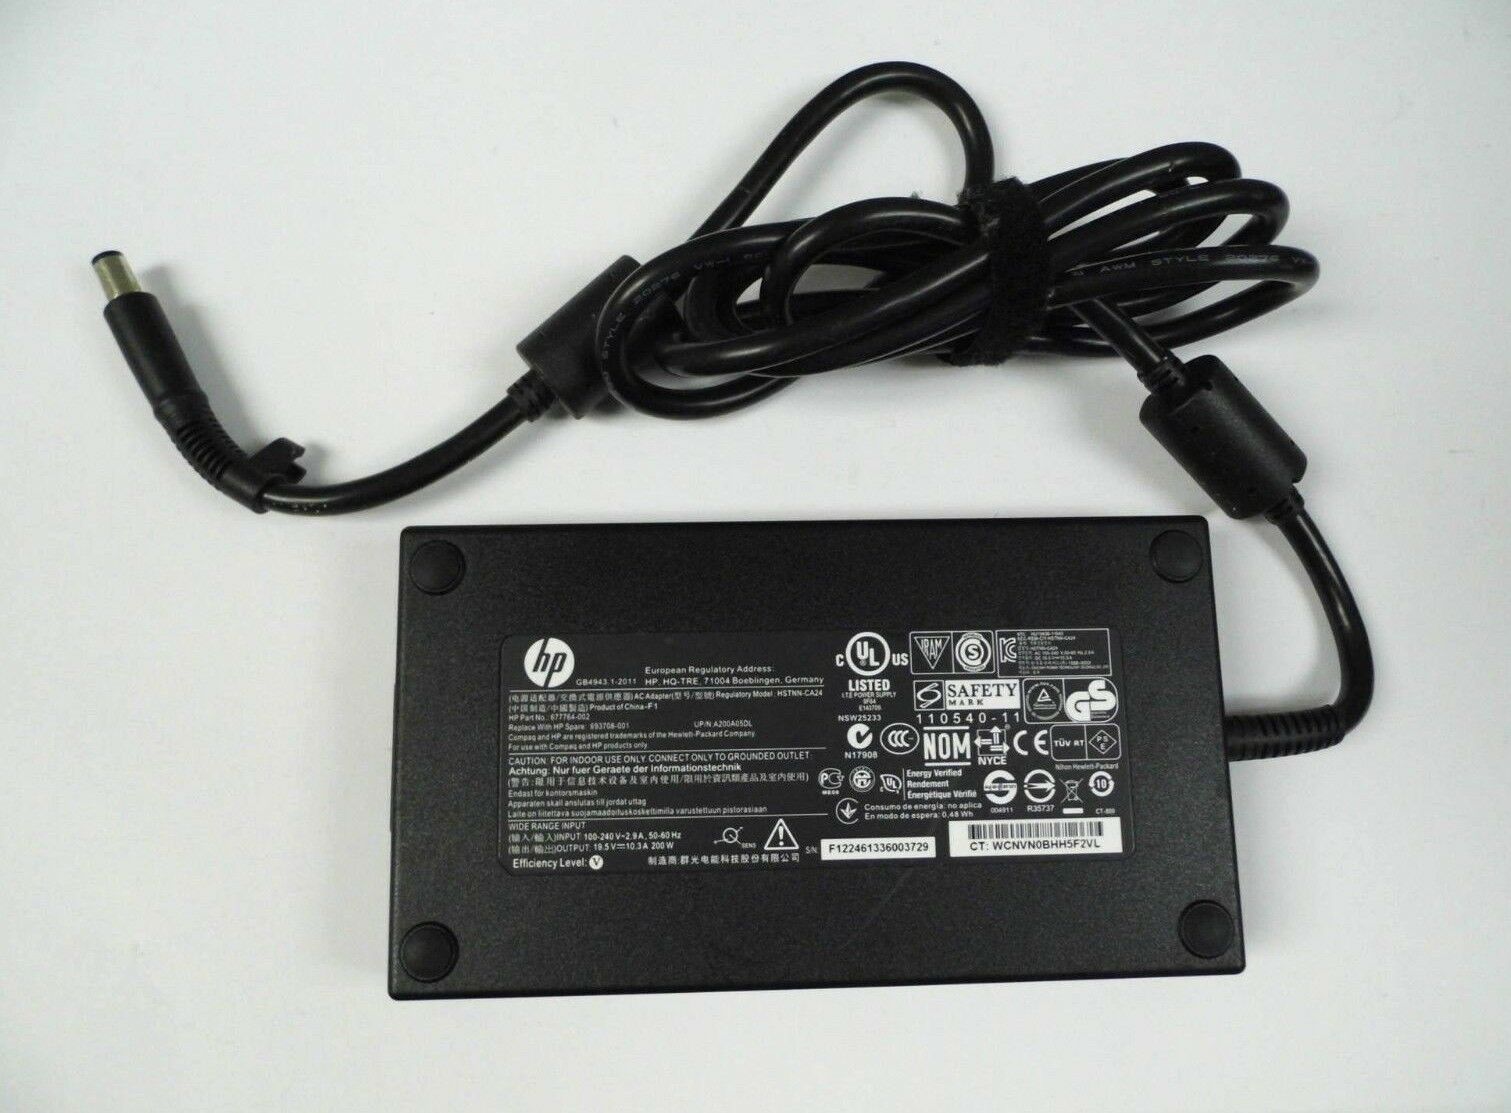 HP 644698-001 AC Adapter Power Supply Cord Cable Charger Genuine Original